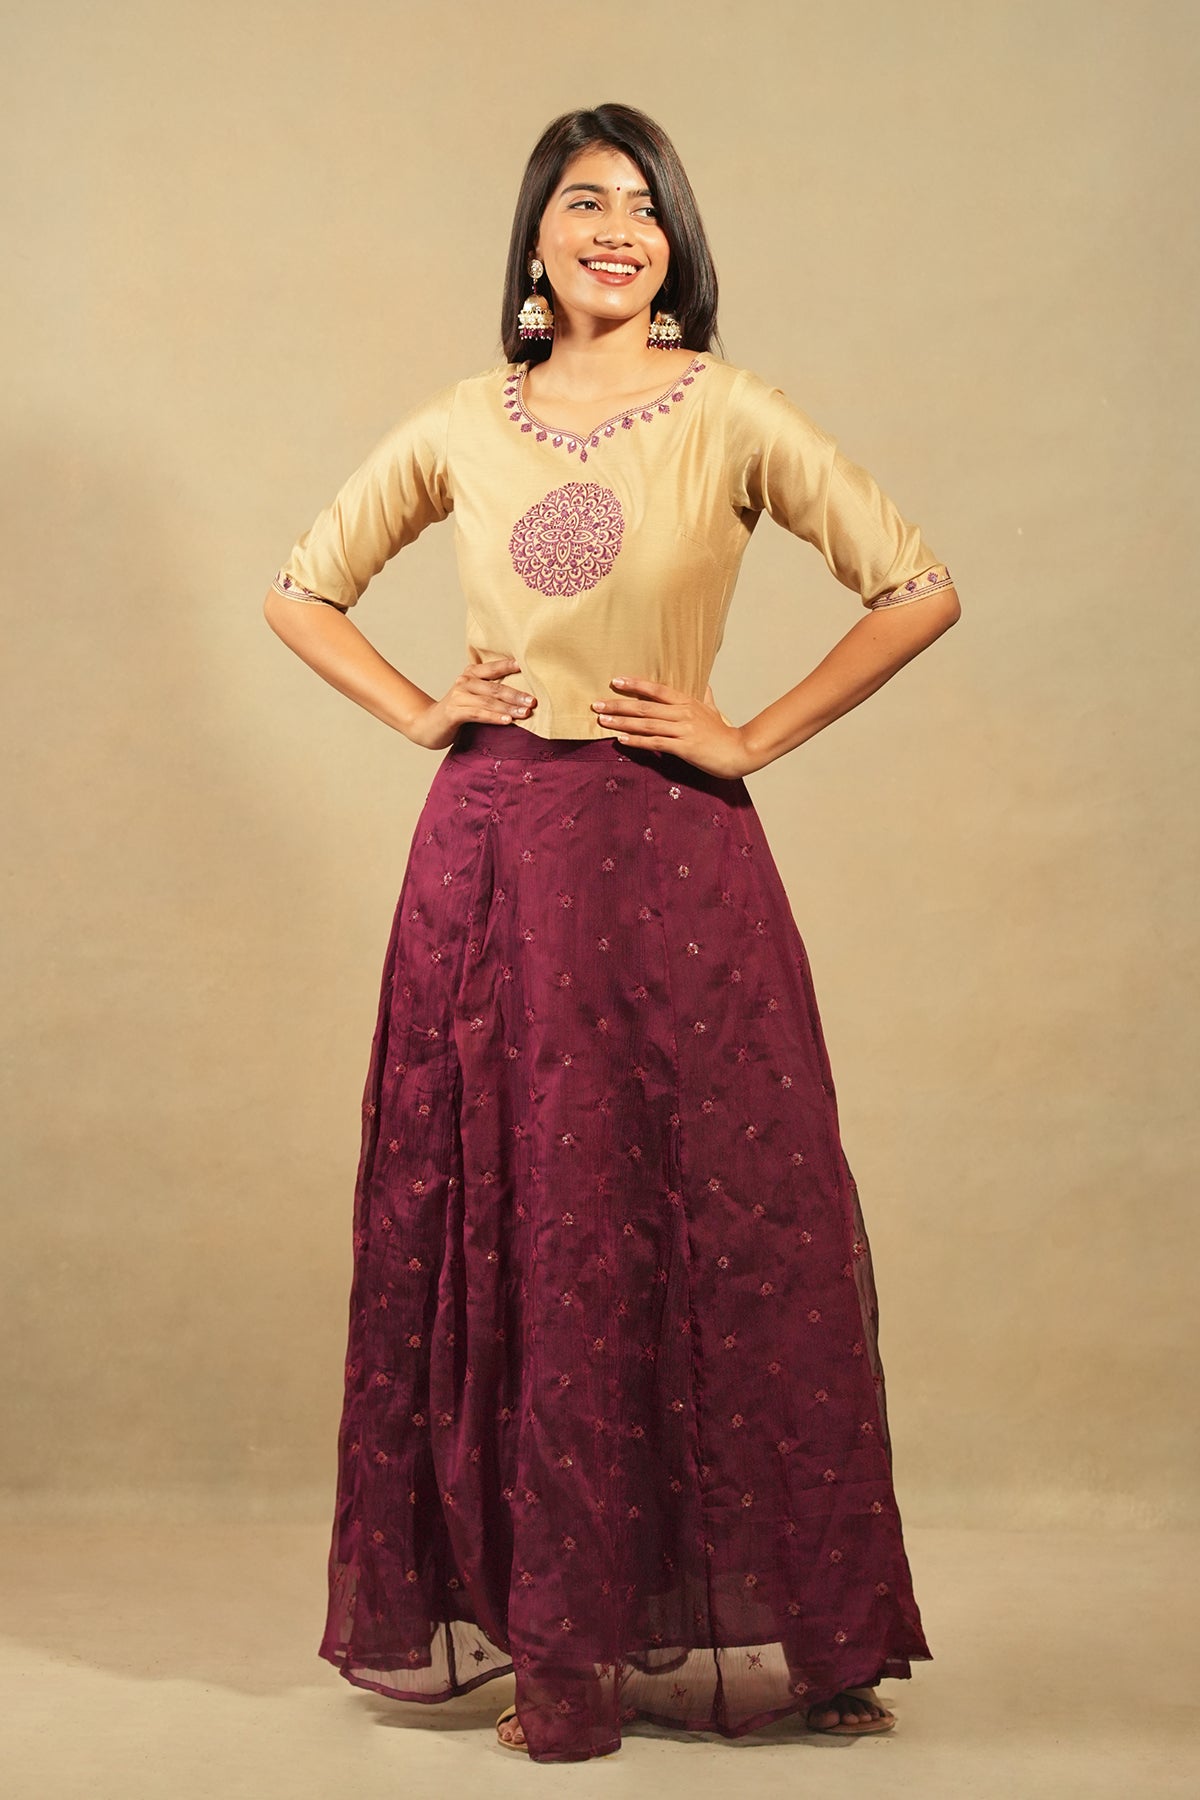 Mandala Placement Top With All Over Sequins Skirt Set - Beige & Burgundy